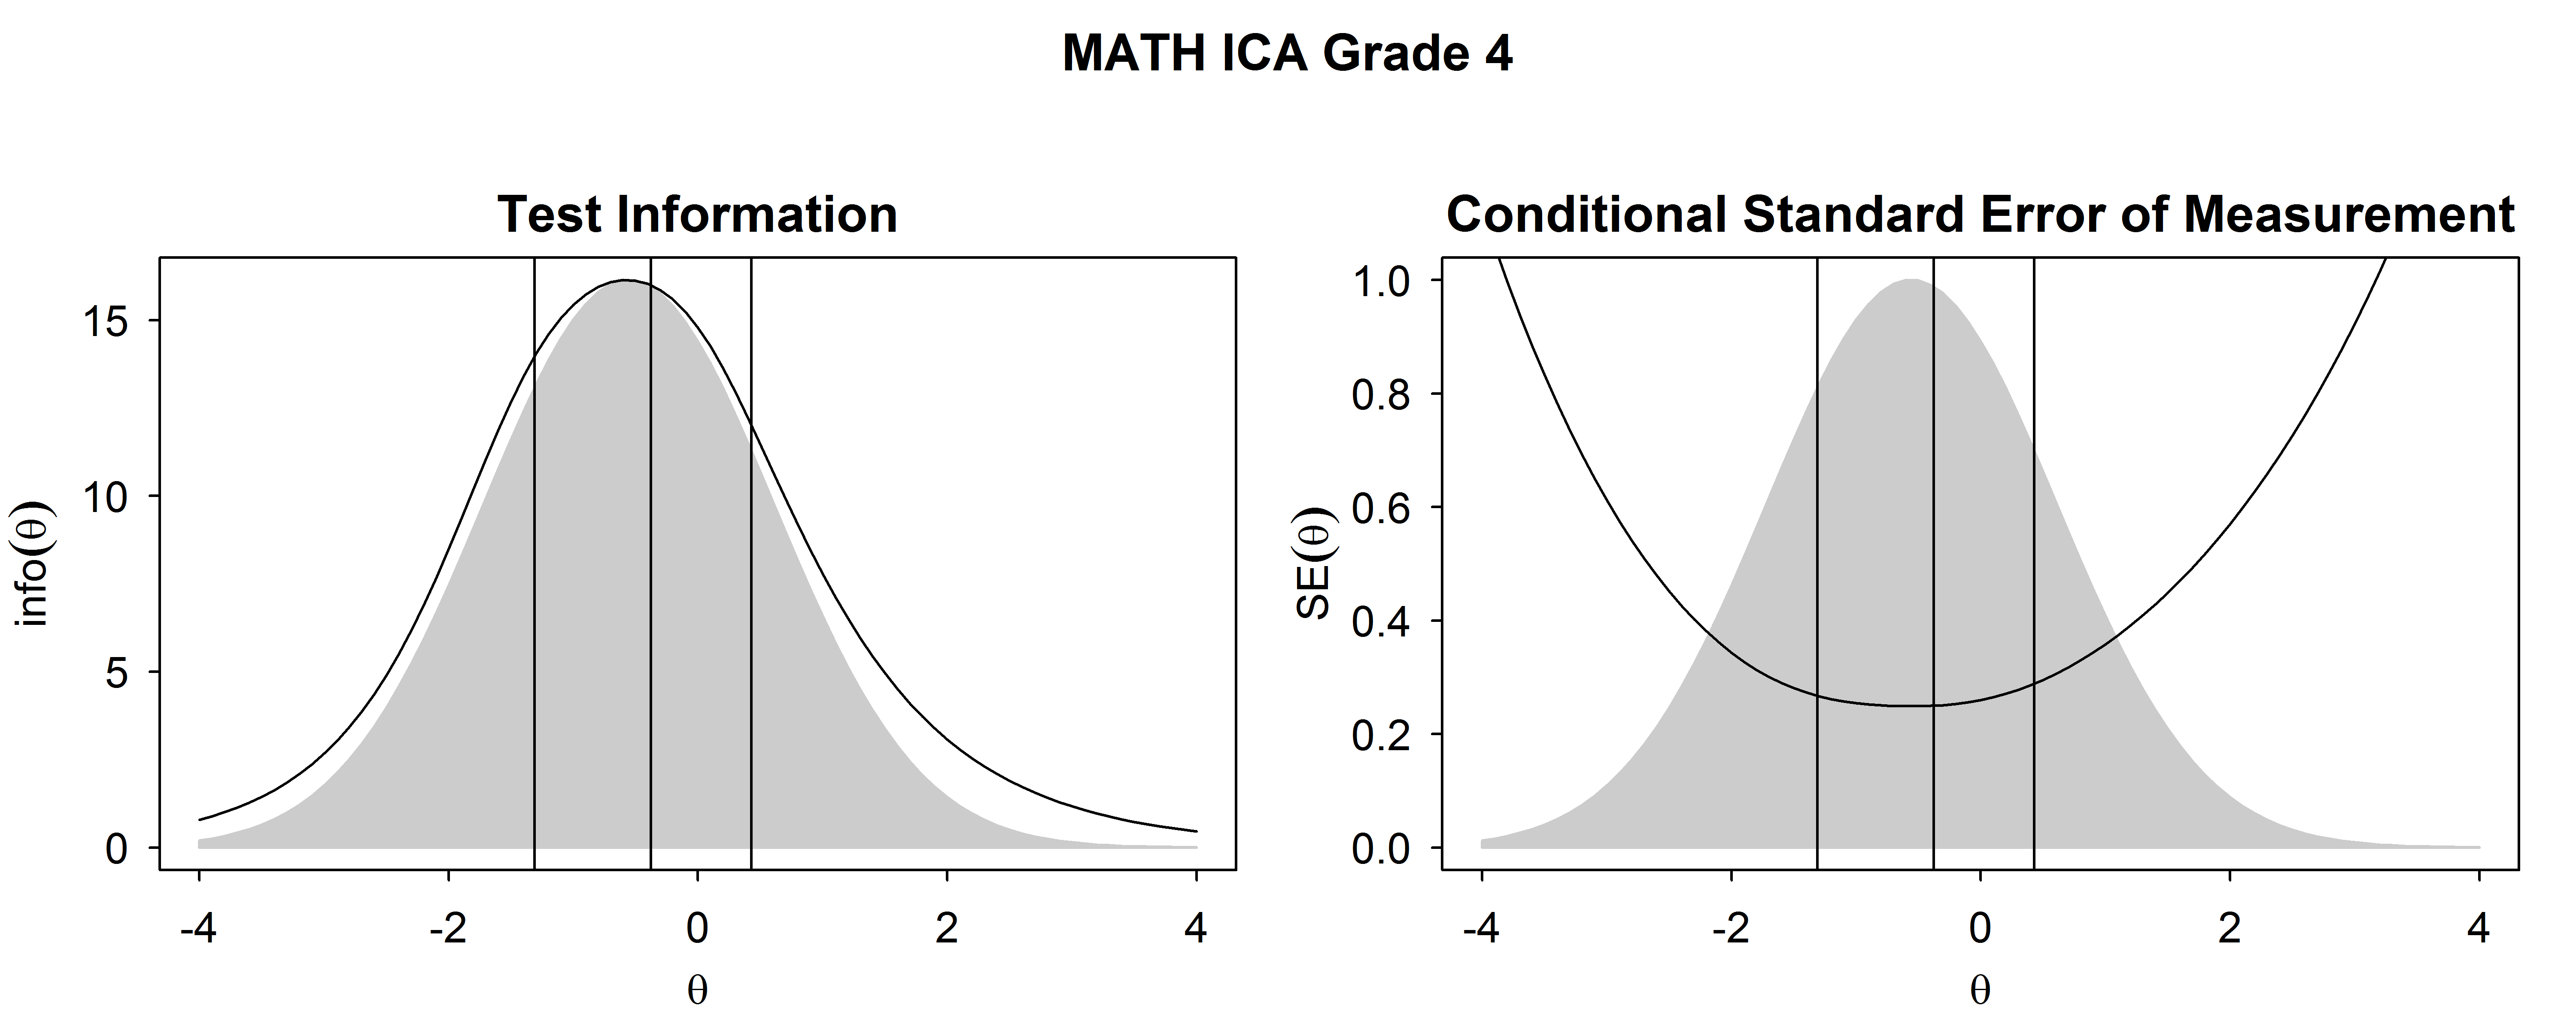 Test Information Functions and SEM For Mathematics ICA, Grade 4